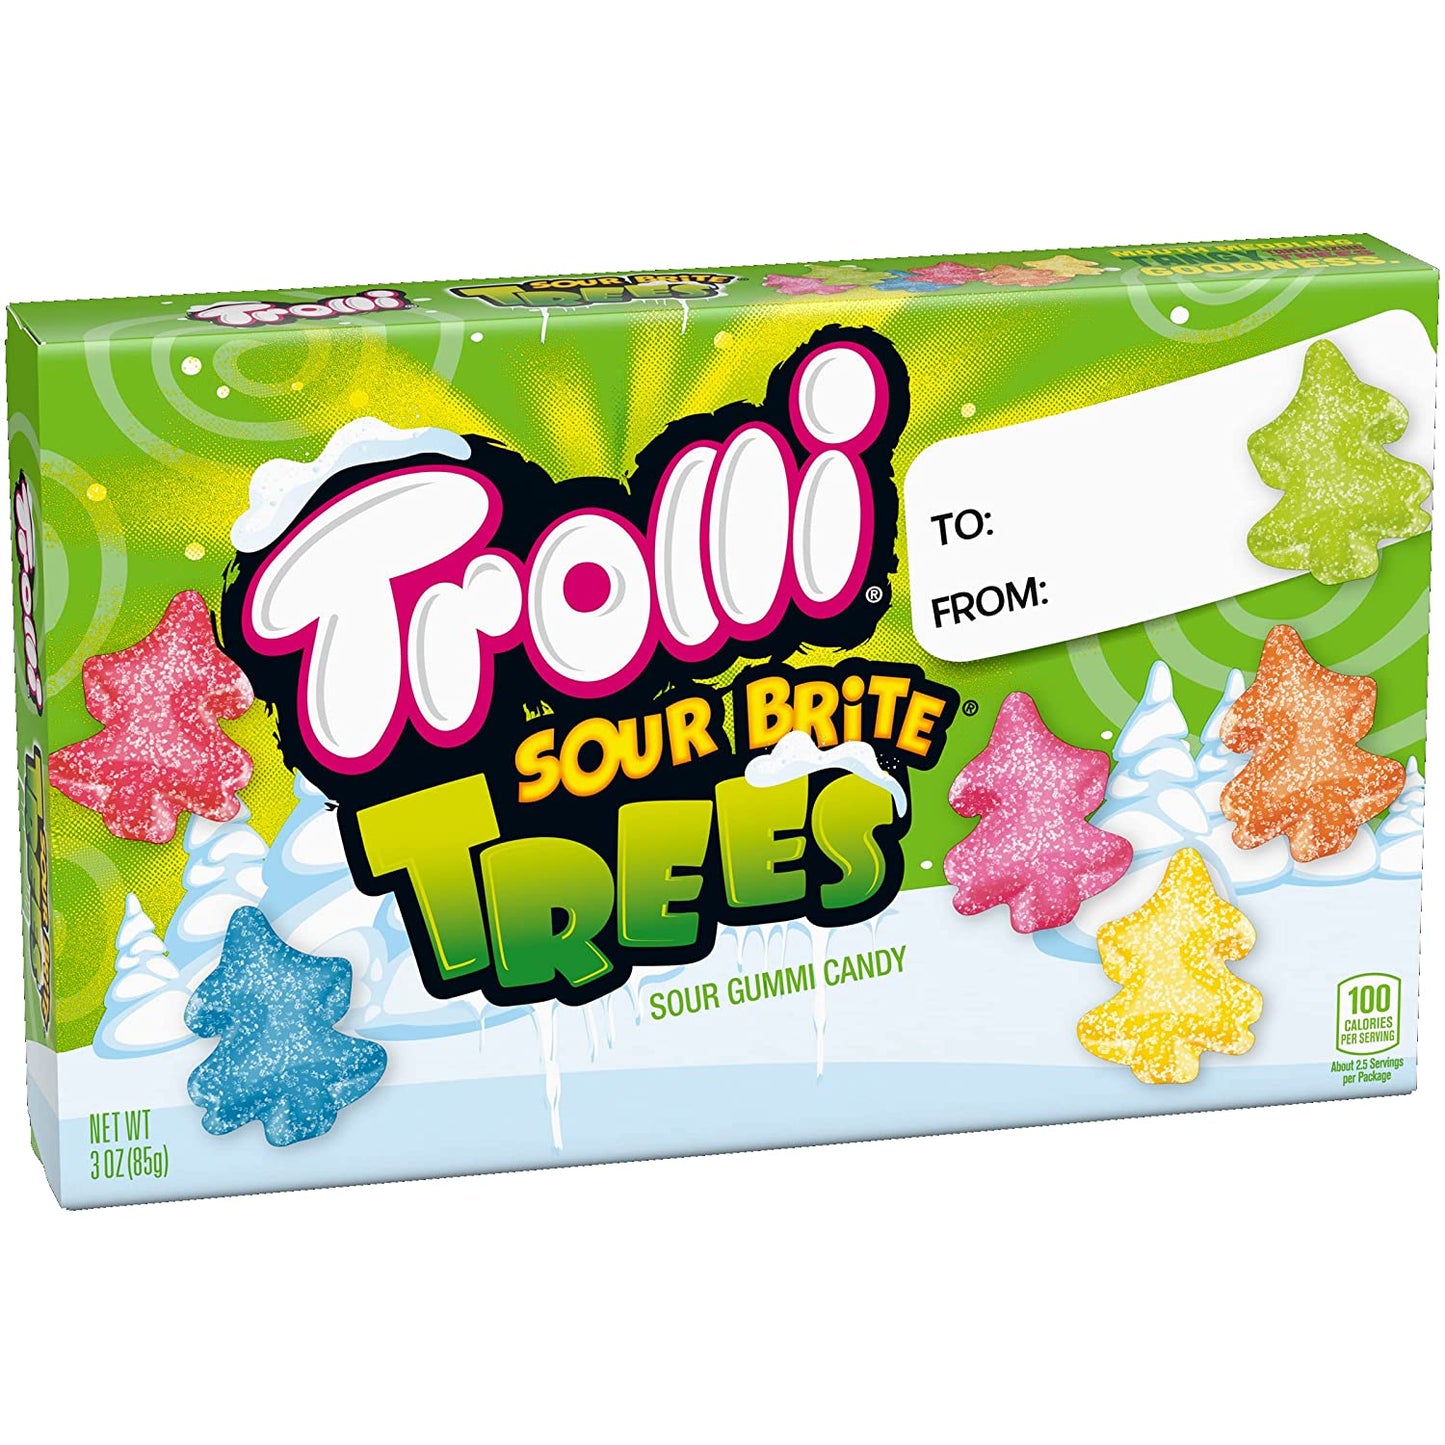 Trolli Sour Brite Trees, Holiday Sour Gummi Candy, Holiday Candy Theater Box, Christmas Candy Stocking Stuffers for Kids, 5.85 lbs, Pack of 12 Boxes